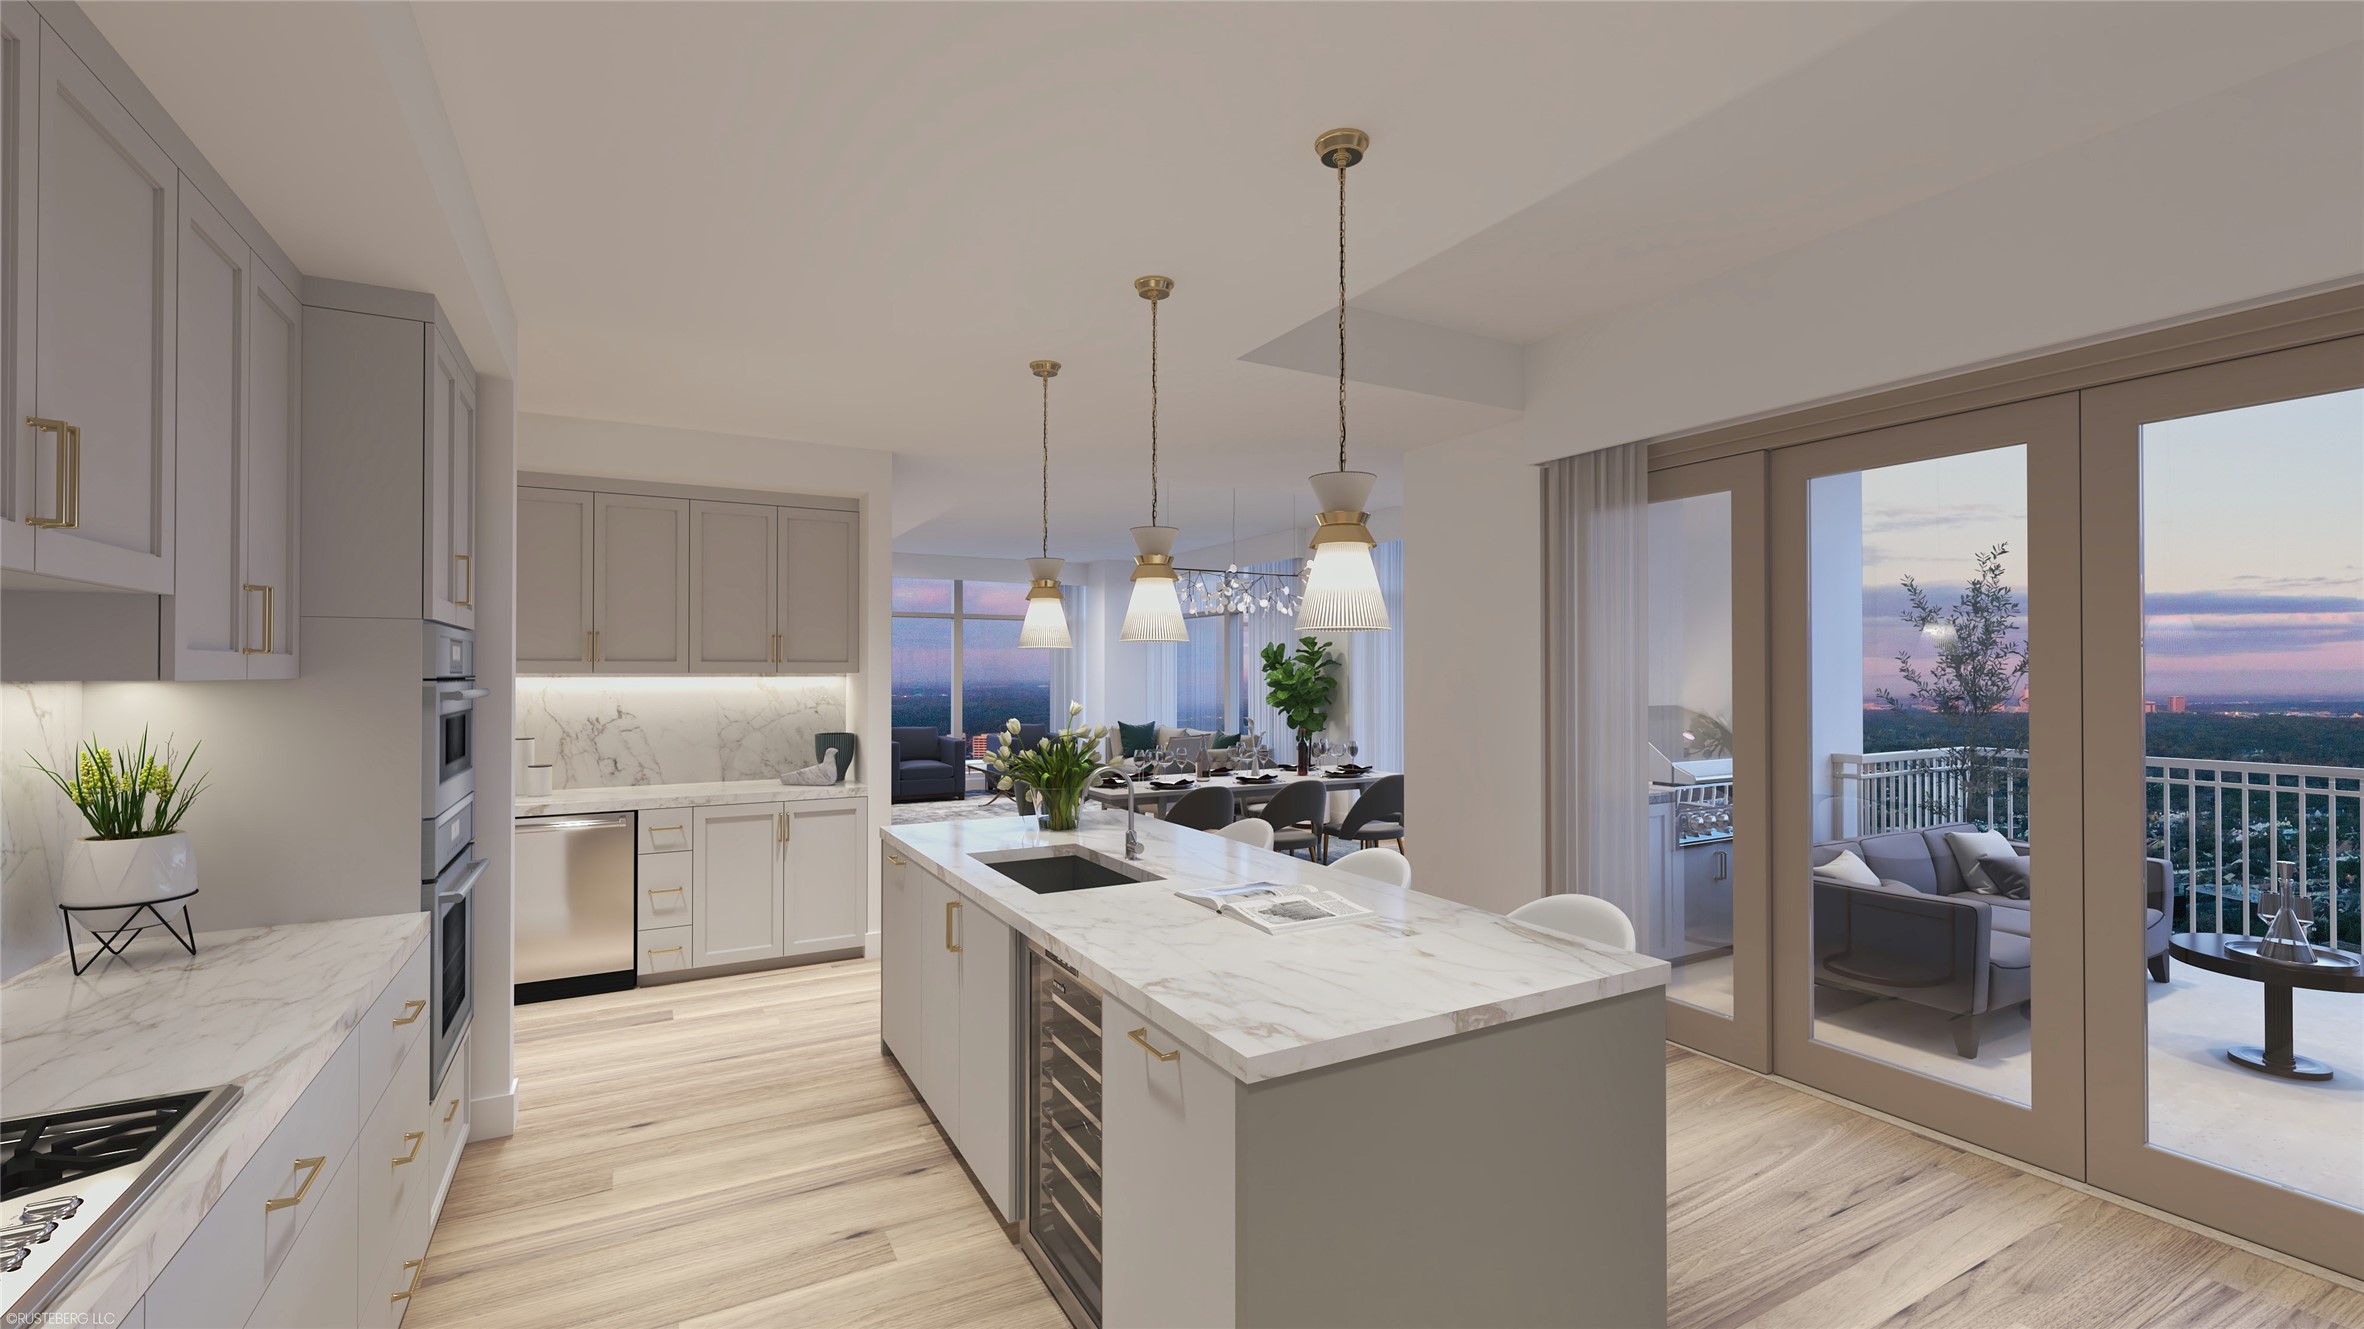 Flawless porcelain slab countertops perfectly coordinate with wide-plank flooring and brass finishes. Soaring window-walls bask in the impressive views that surround The Hawthorne, and transition into balcony access for easy outdoor entertainment.